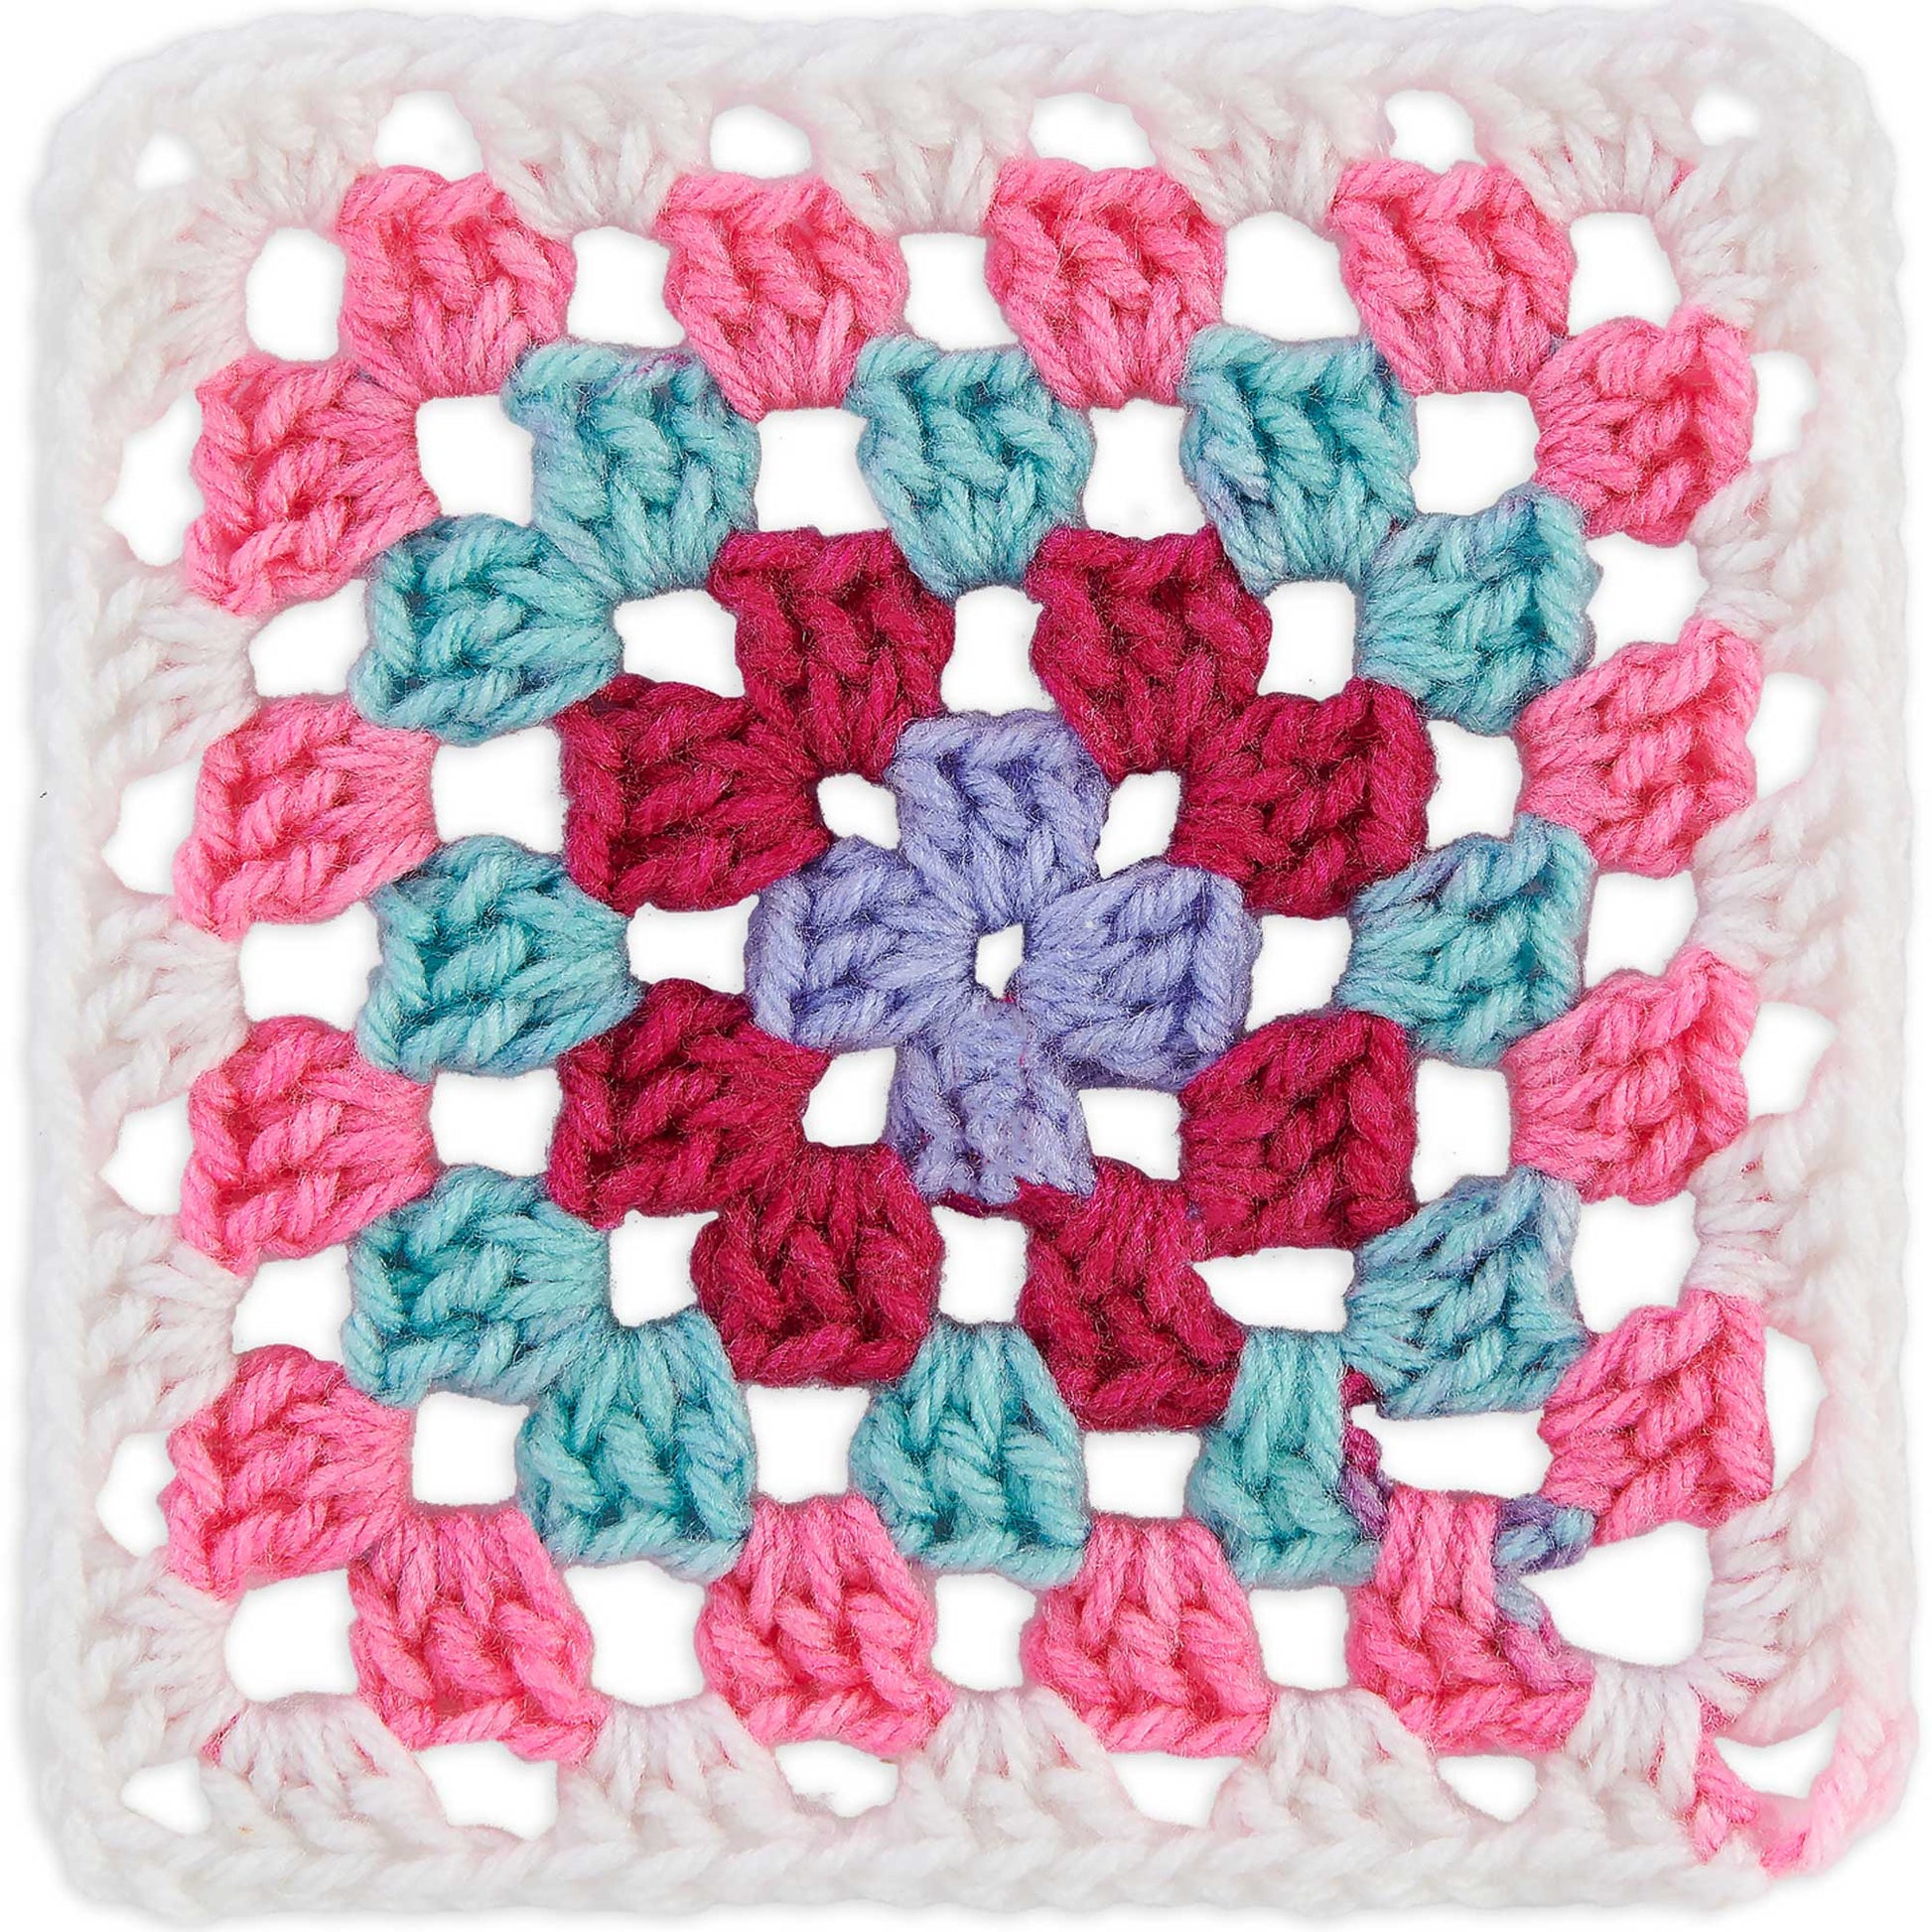 Red Heart All In One Granny Square Yarn (250g/8.8oz) Soft  White - Pink Punch